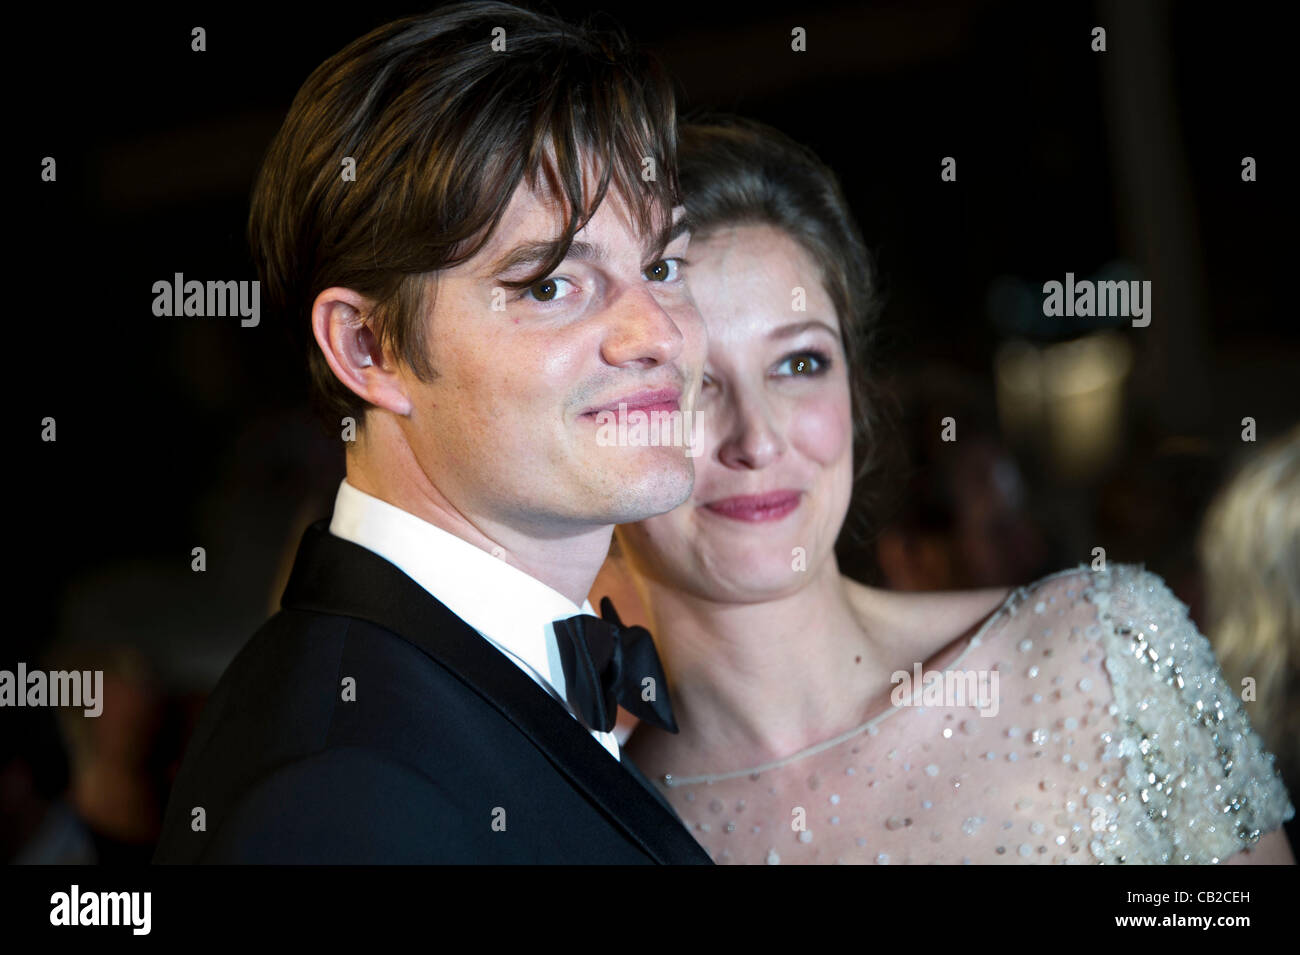 Sam Riley (actor) & guest at red carpet departures for film 'On The Road' 65th Cannes Film Festival 2012 Palais des Festival, Cannes, France Wed 23 May 2012 Stock Photo